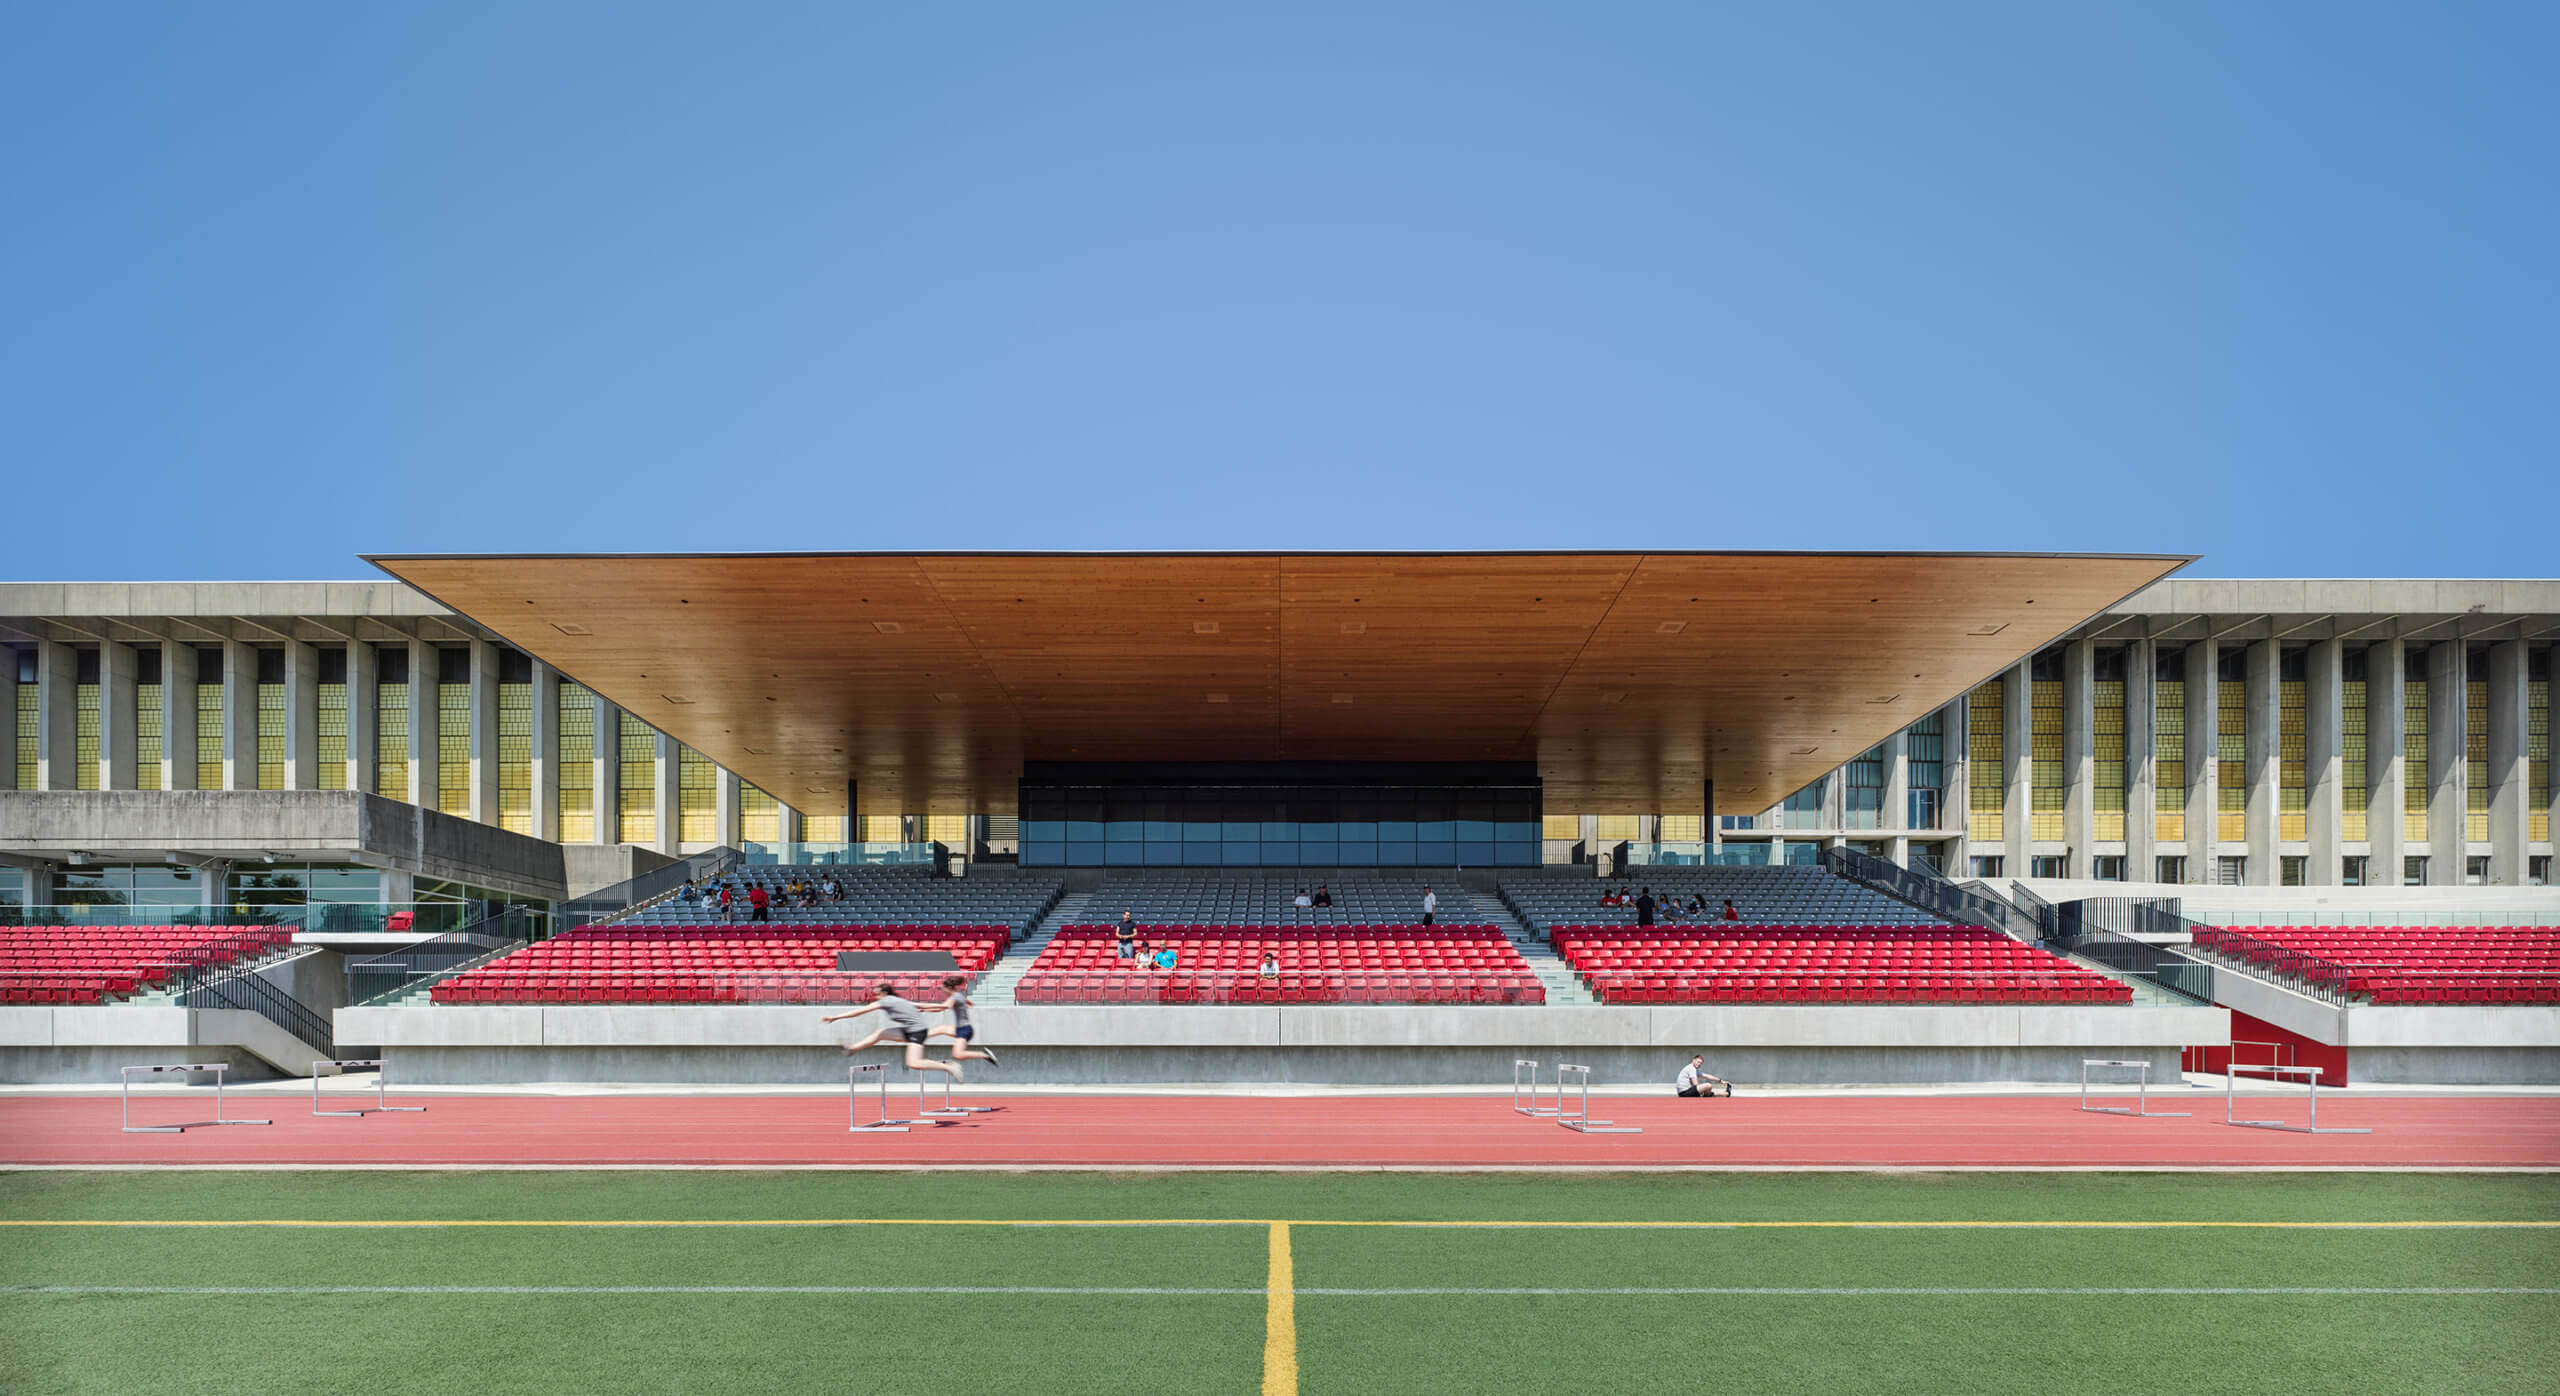 SFU Stadium from the 50-yard line of the field.